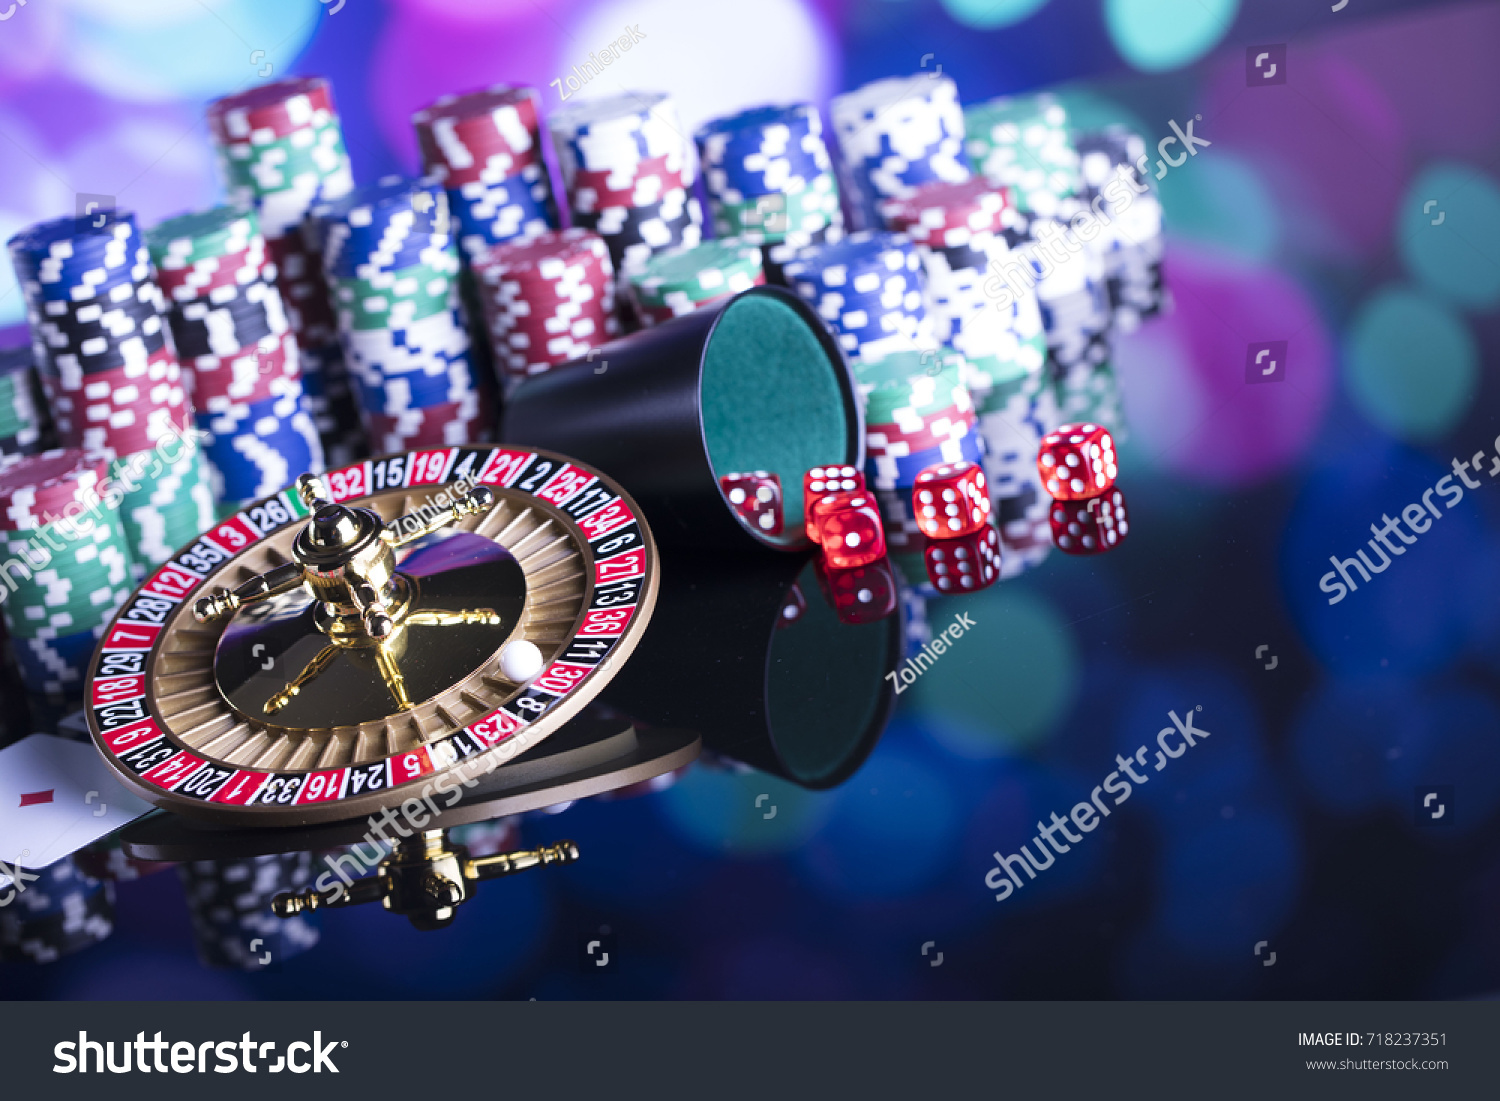 Casino theme. High contrast image of casino roulette, poker game, dice game, poker chips on a gaming table, all on colorful bokeh background.  #718237351